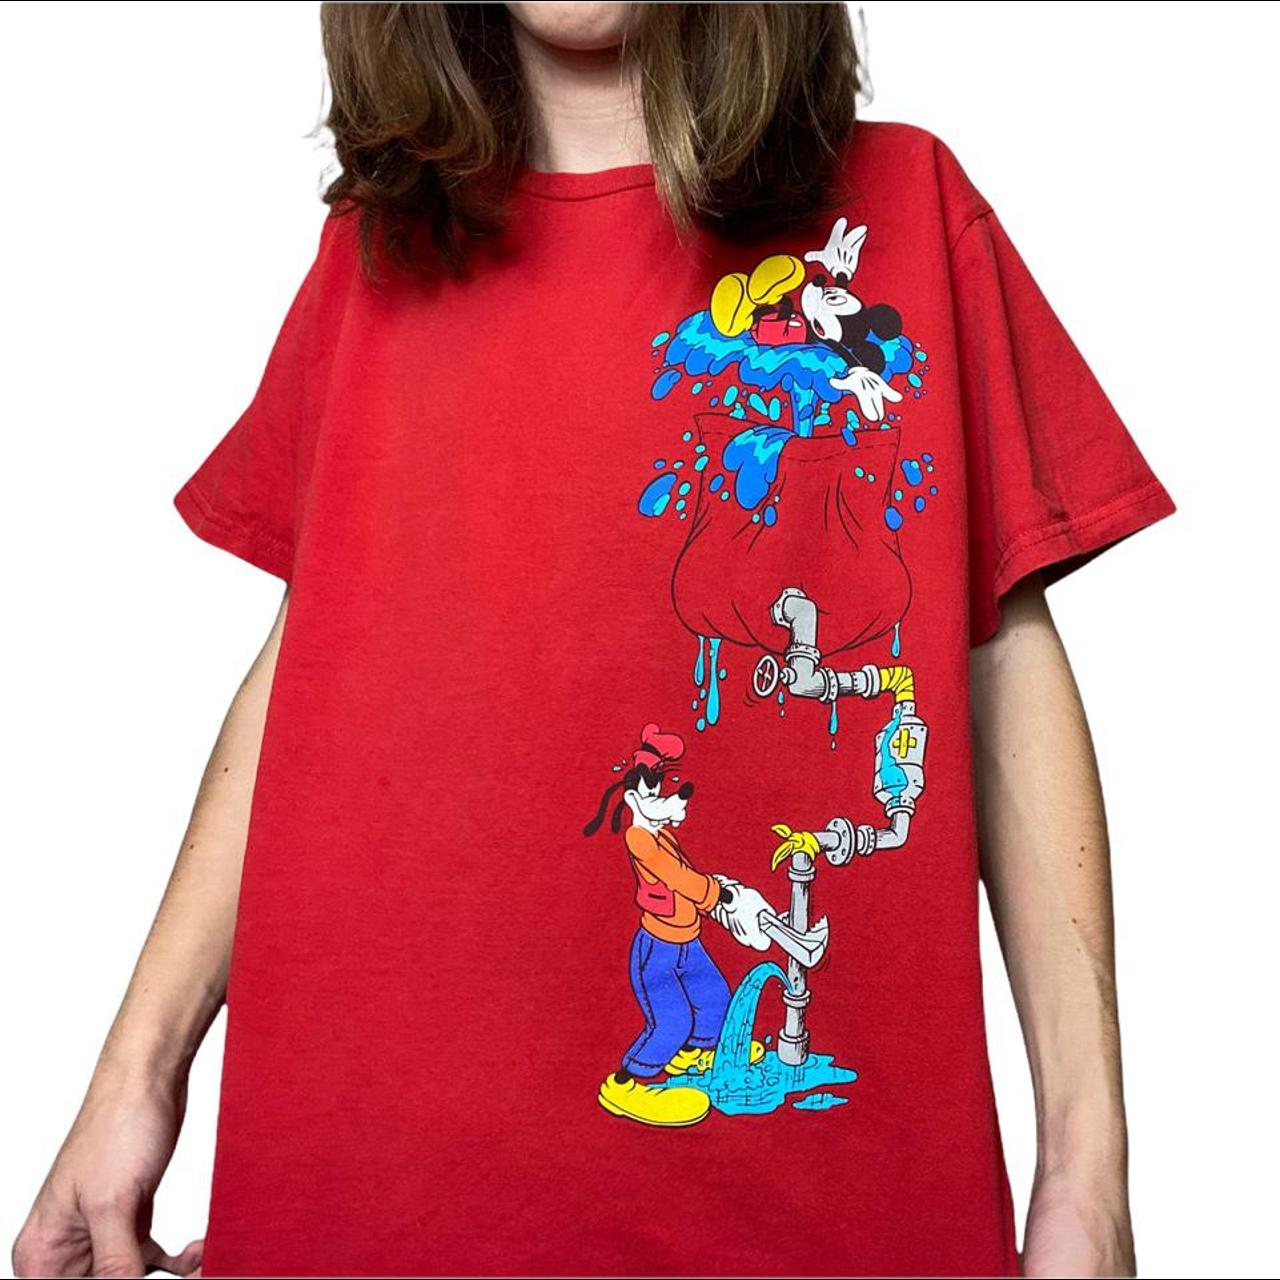 Disney Men's Red and Blue T-shirt (2)